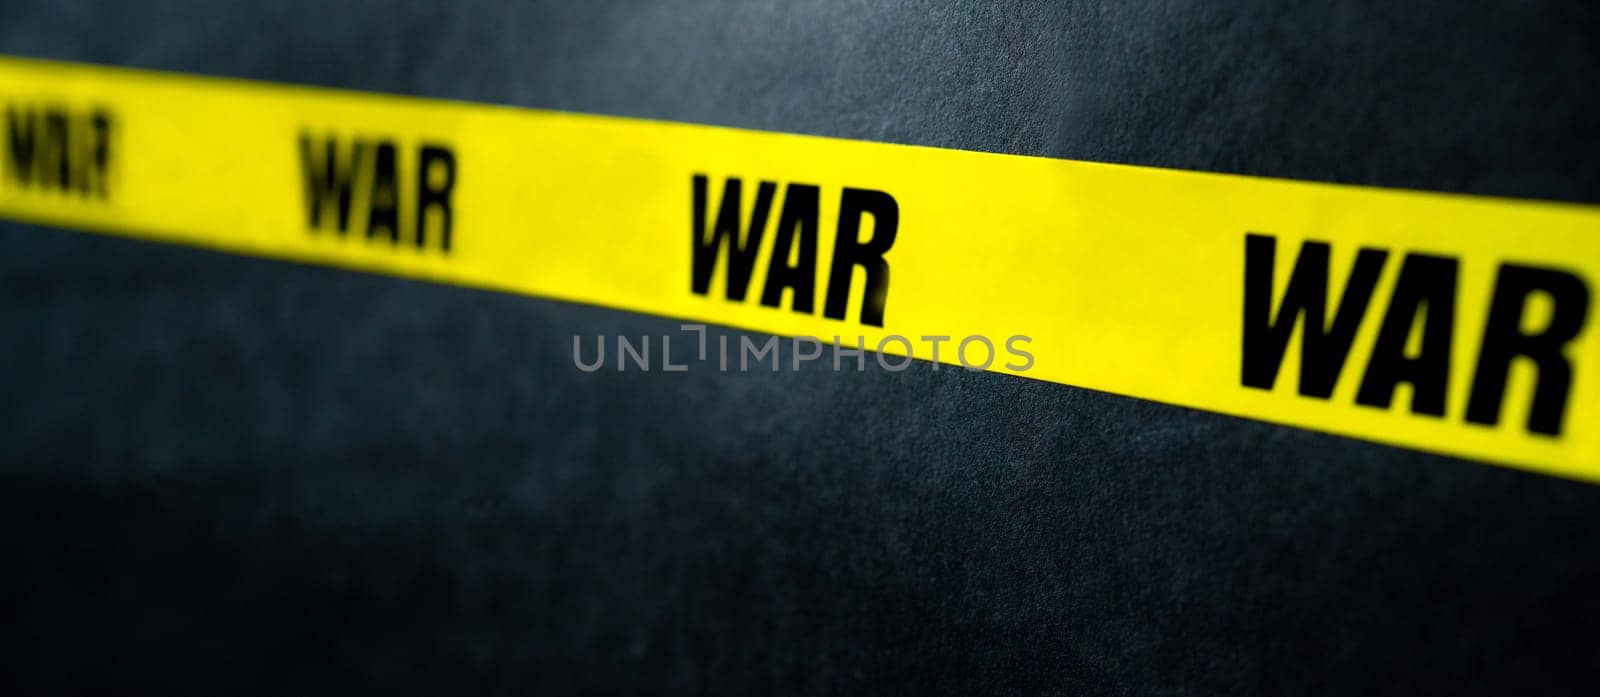 Warning Yellow Tape Stripe With War Text As Warning Stop Millitary Conflict. Concept Of Invasion, Danger And Truth